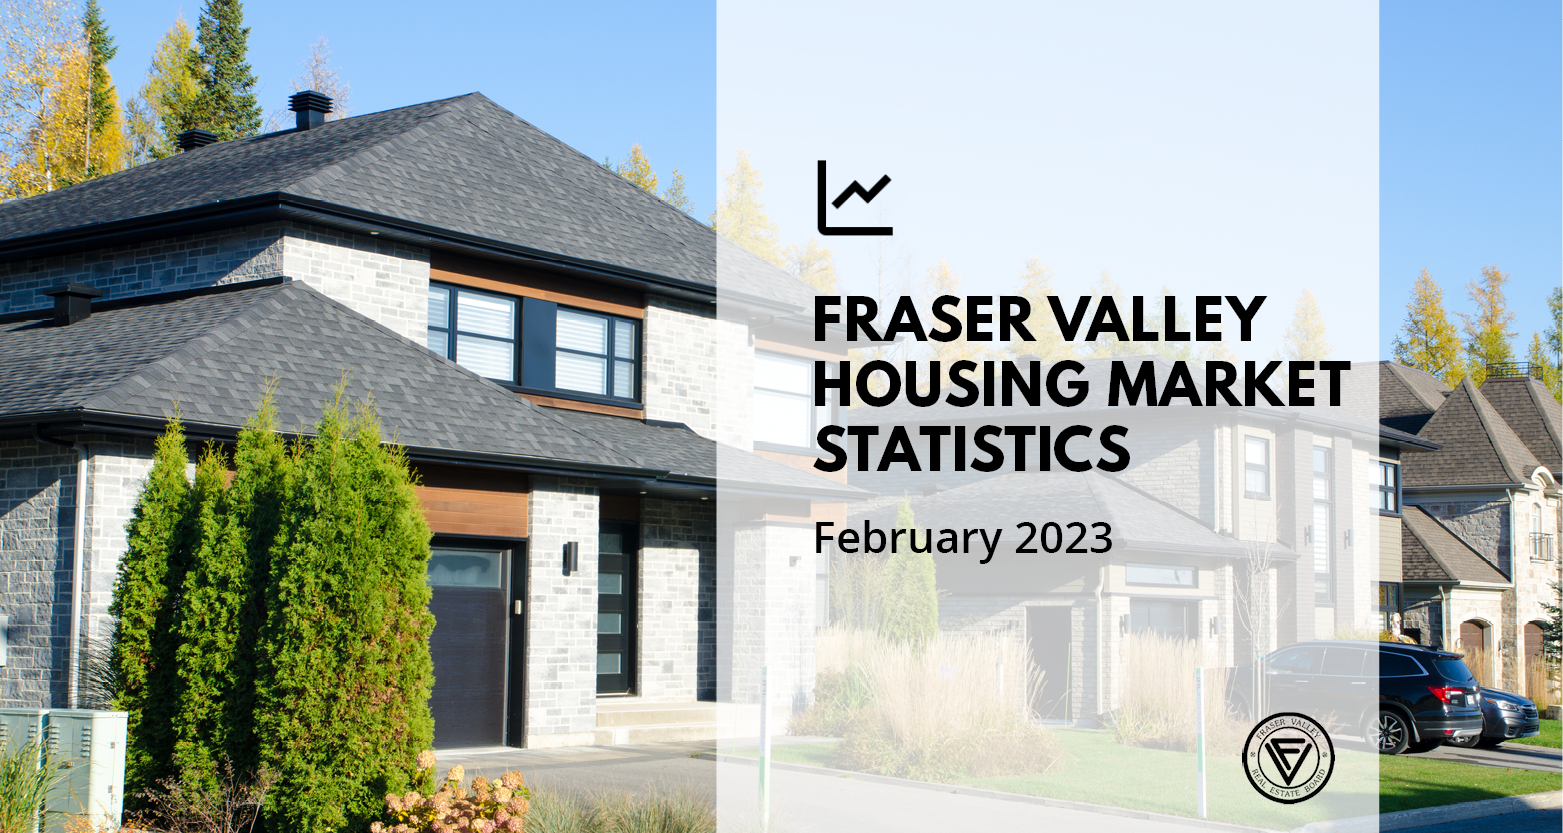 Signs of stability in Fraser Valley create opportunities for home buyers and sellers